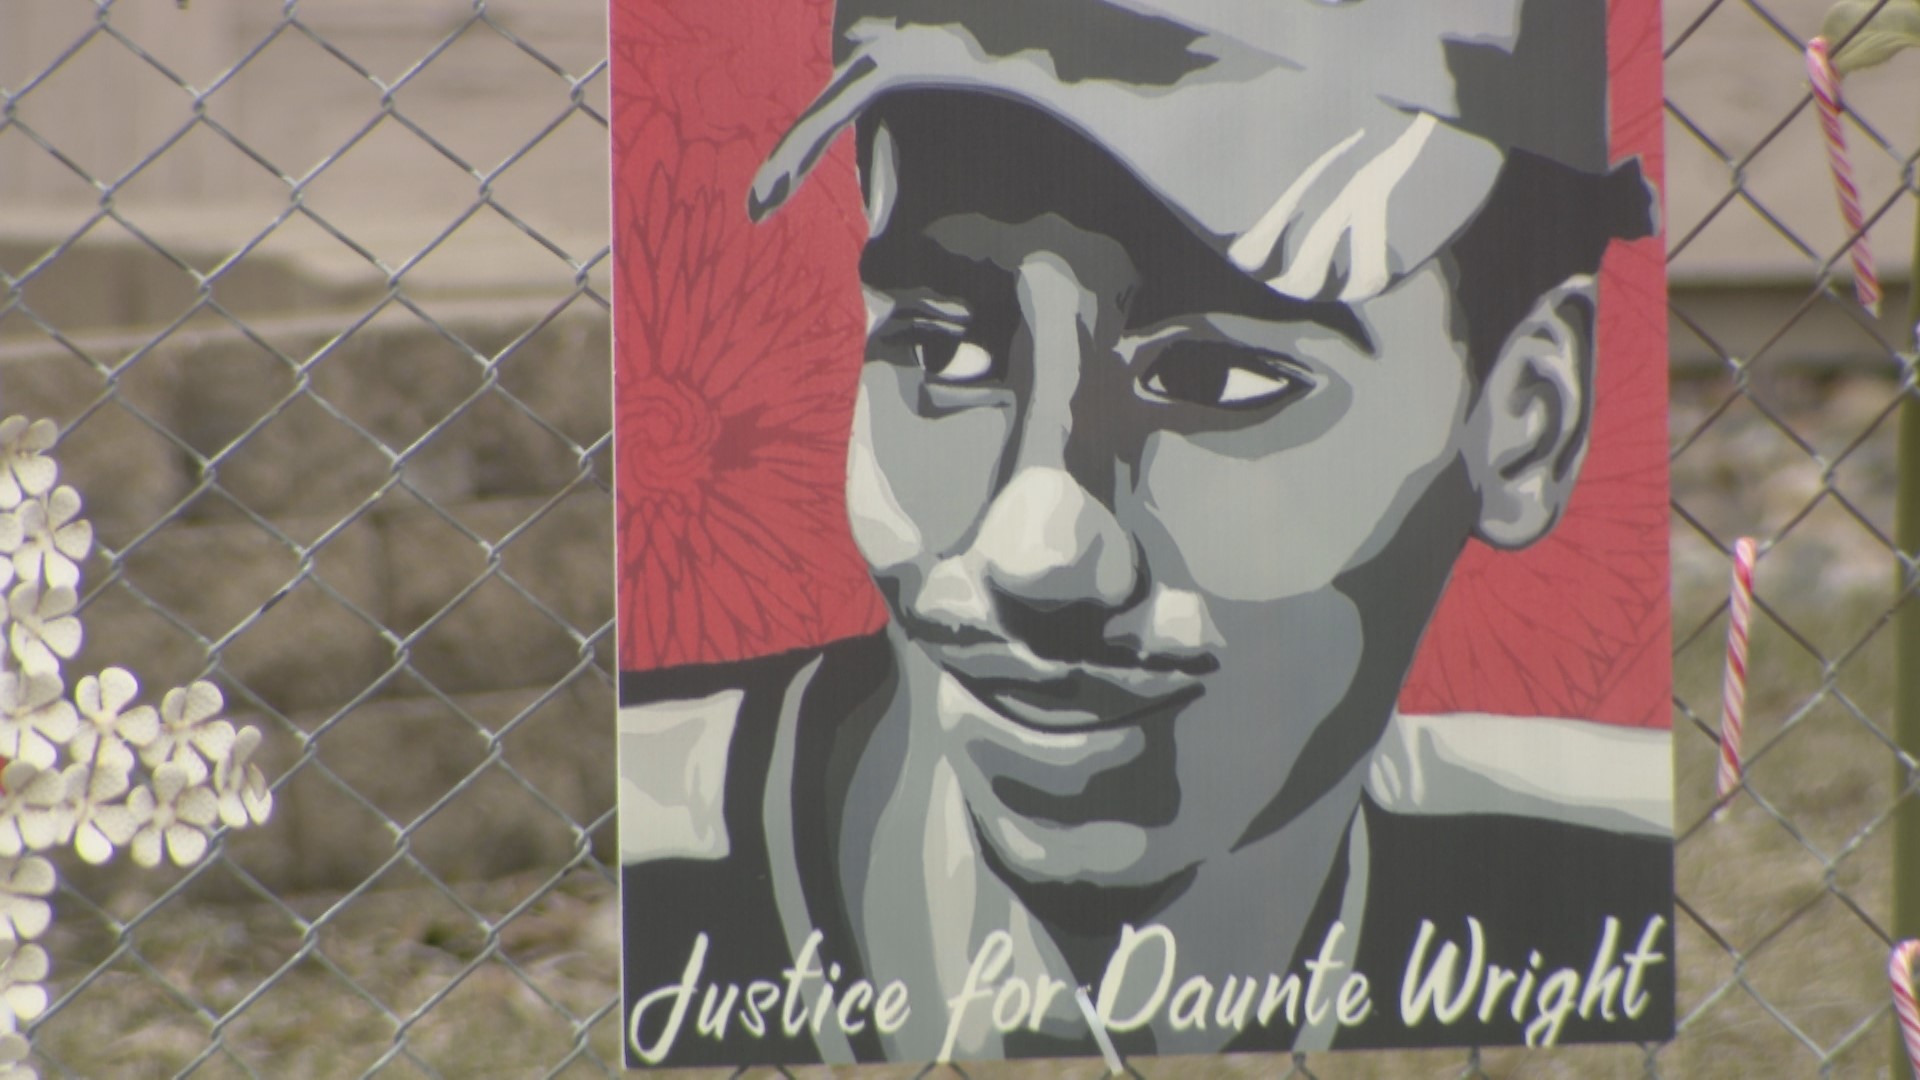 A BBQ and candlelight vigil will take place Monday night at the Daunte Wright Memorial in Brooklyn Center.